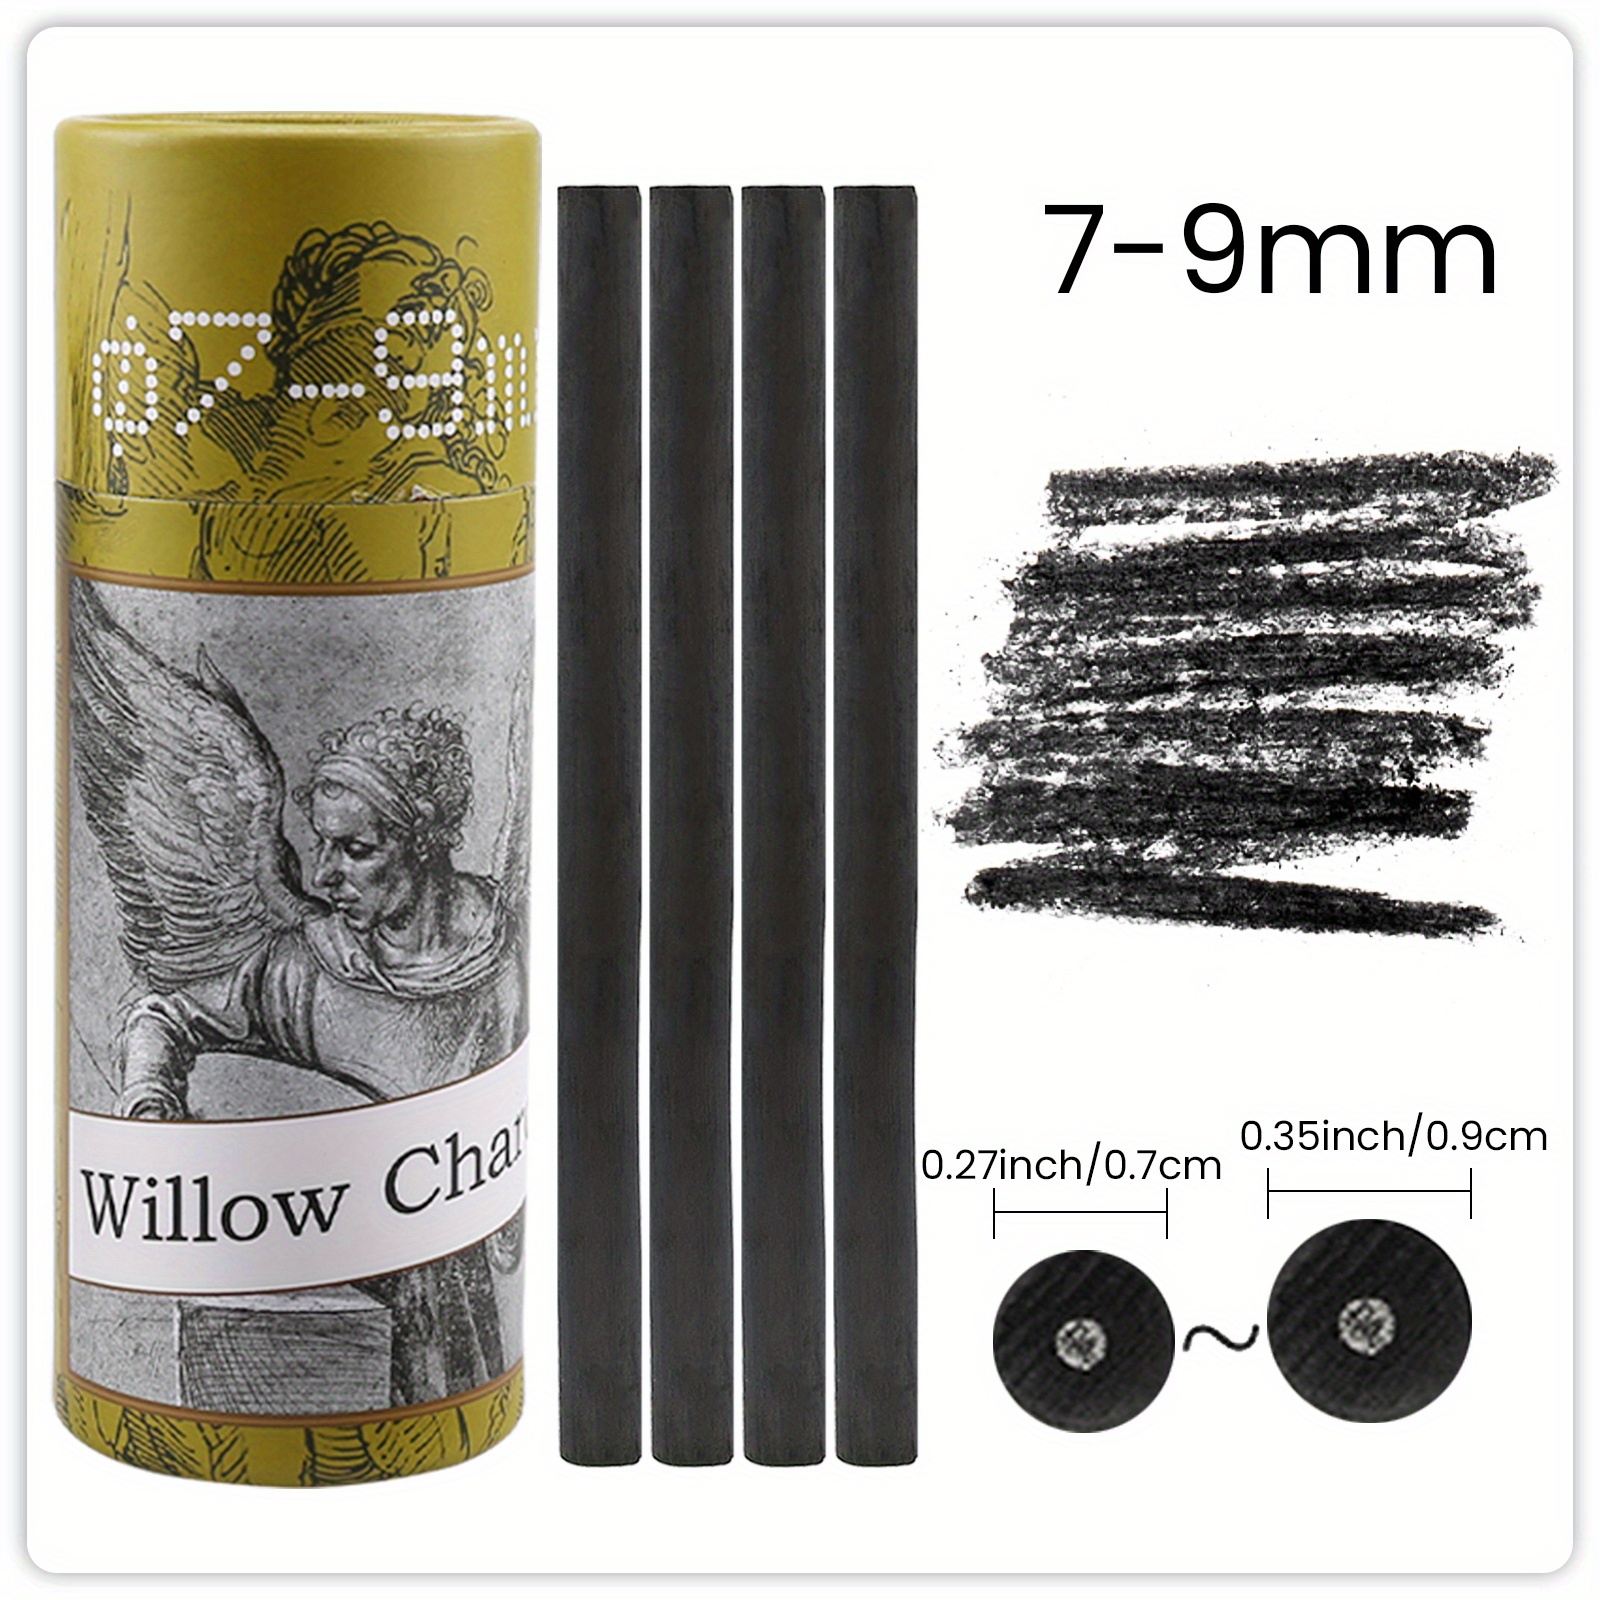 Vine Charcoal Sticks, 4 Pack Willow Charcoal Pencils for Artists